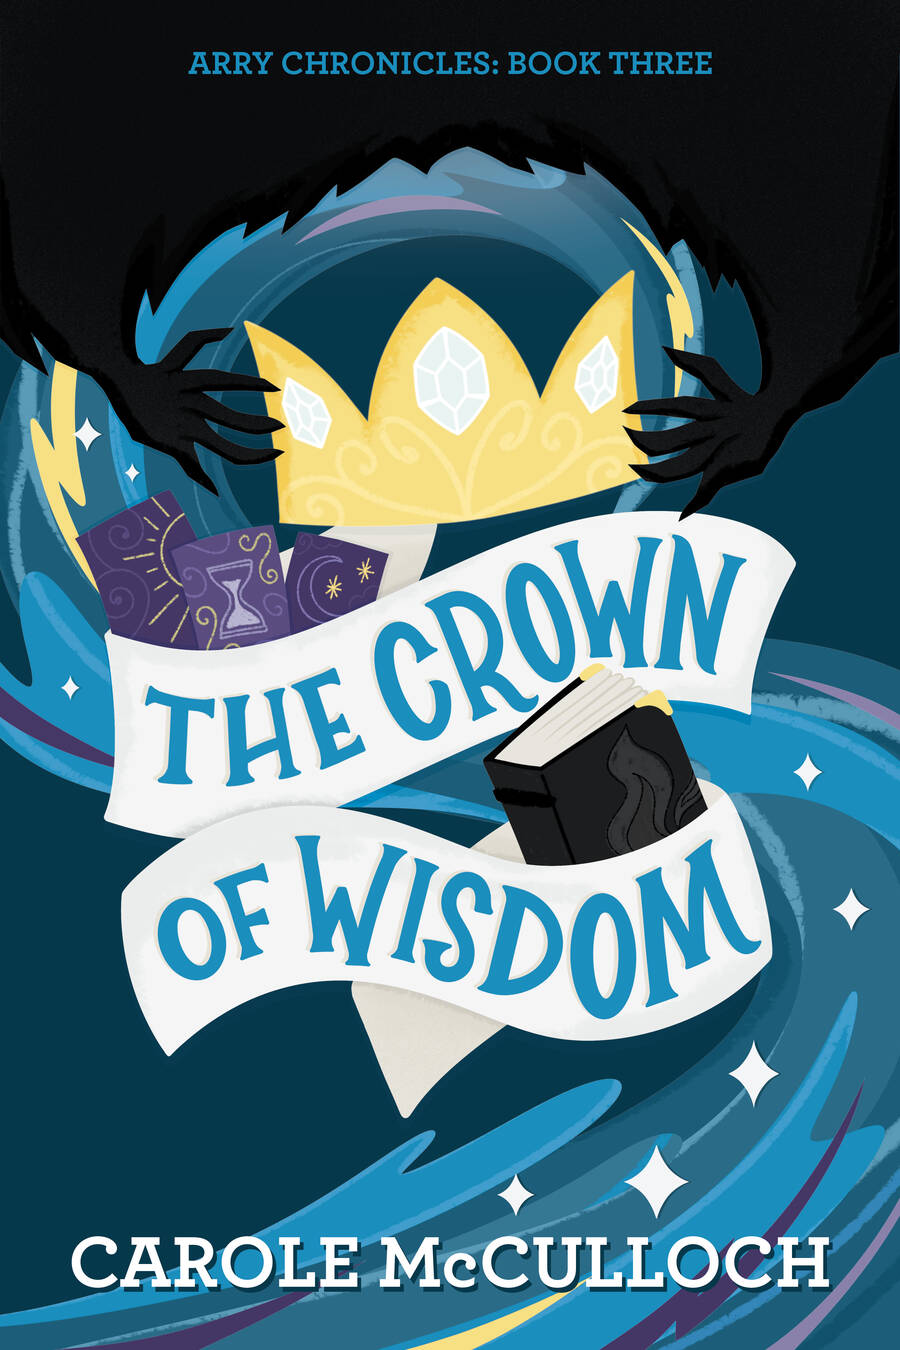 The Crown of Wisdom